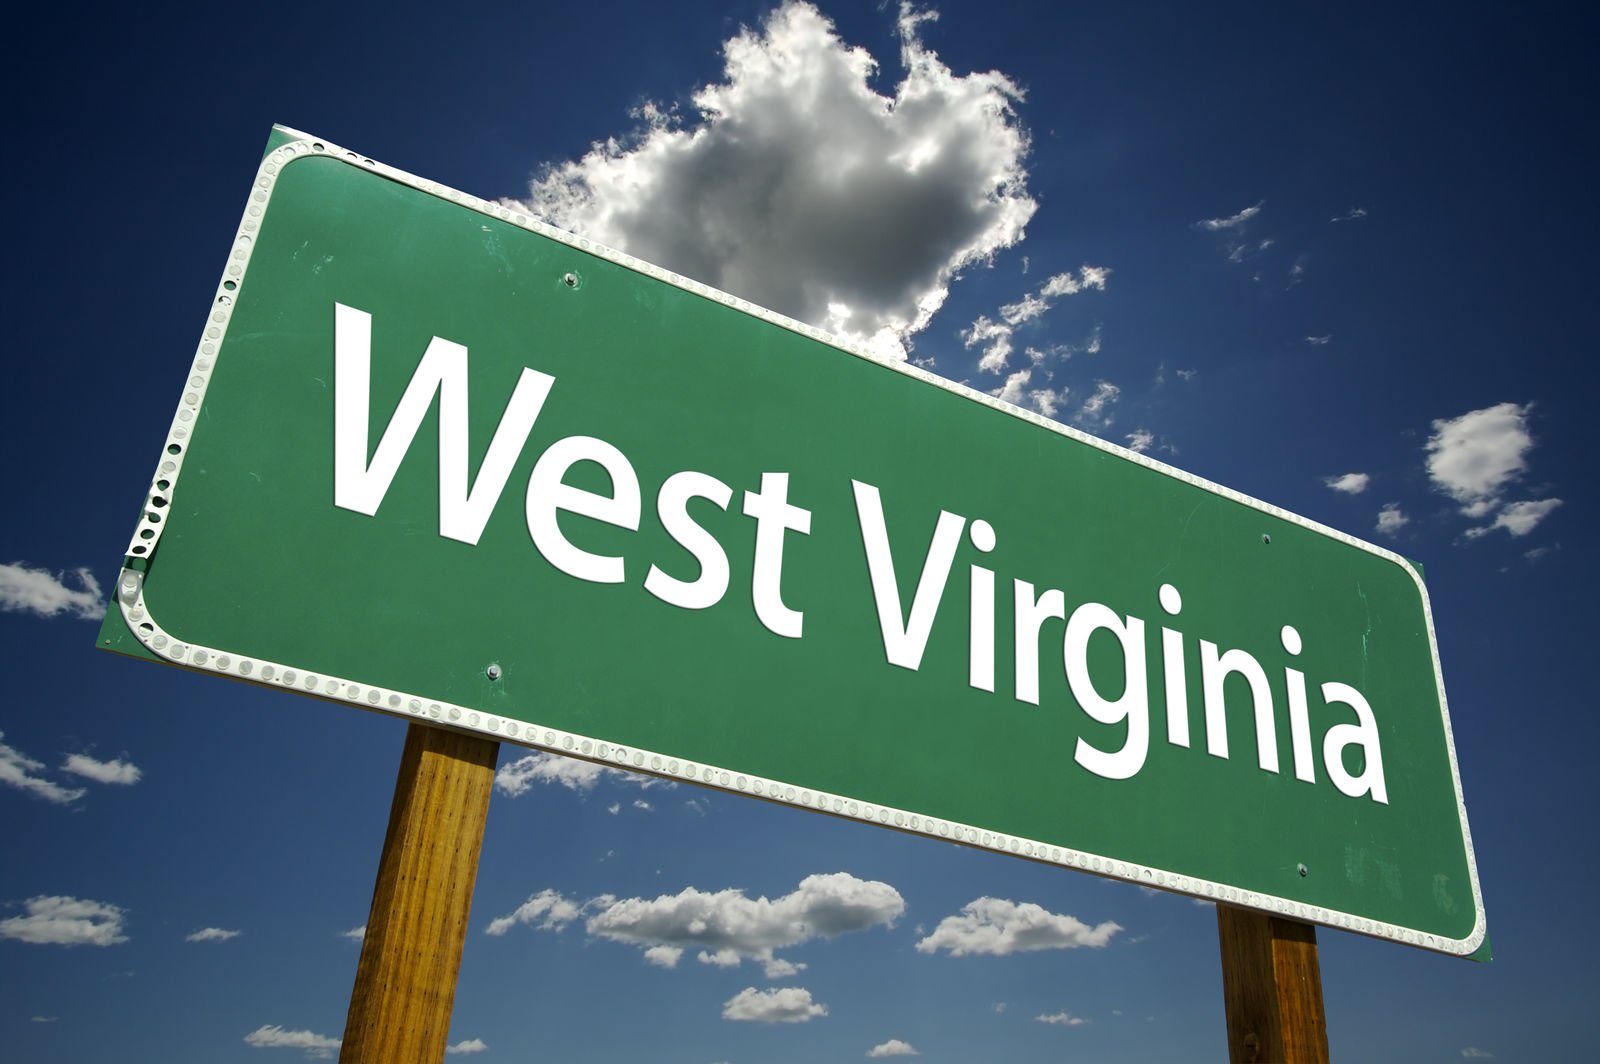 What are the penalties for driving without insurance in West Virginia?